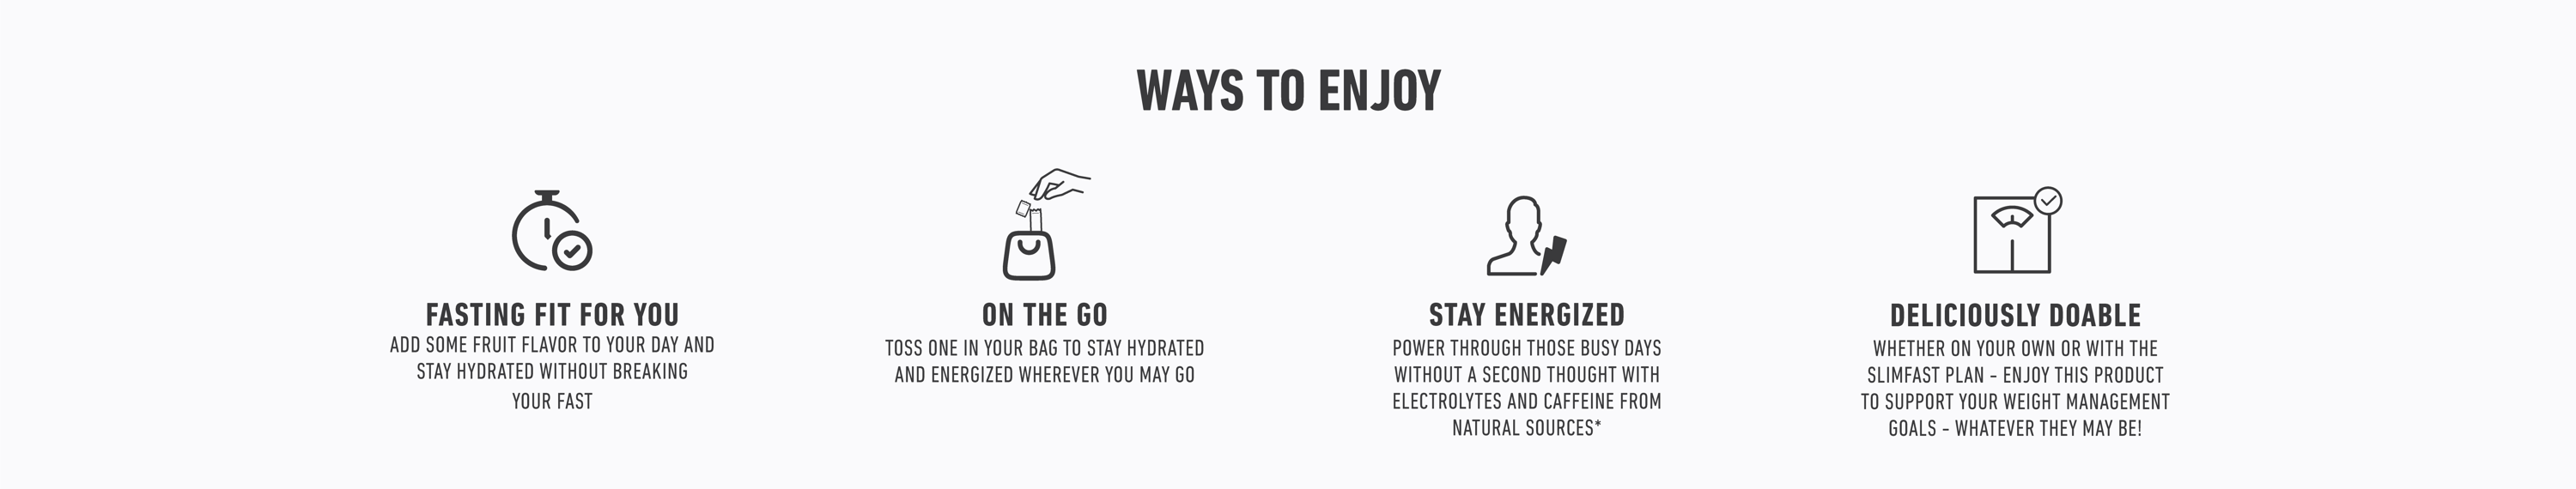  Ways to enjoy: fasting fit for you, on the go, stay energized, deliciously doable